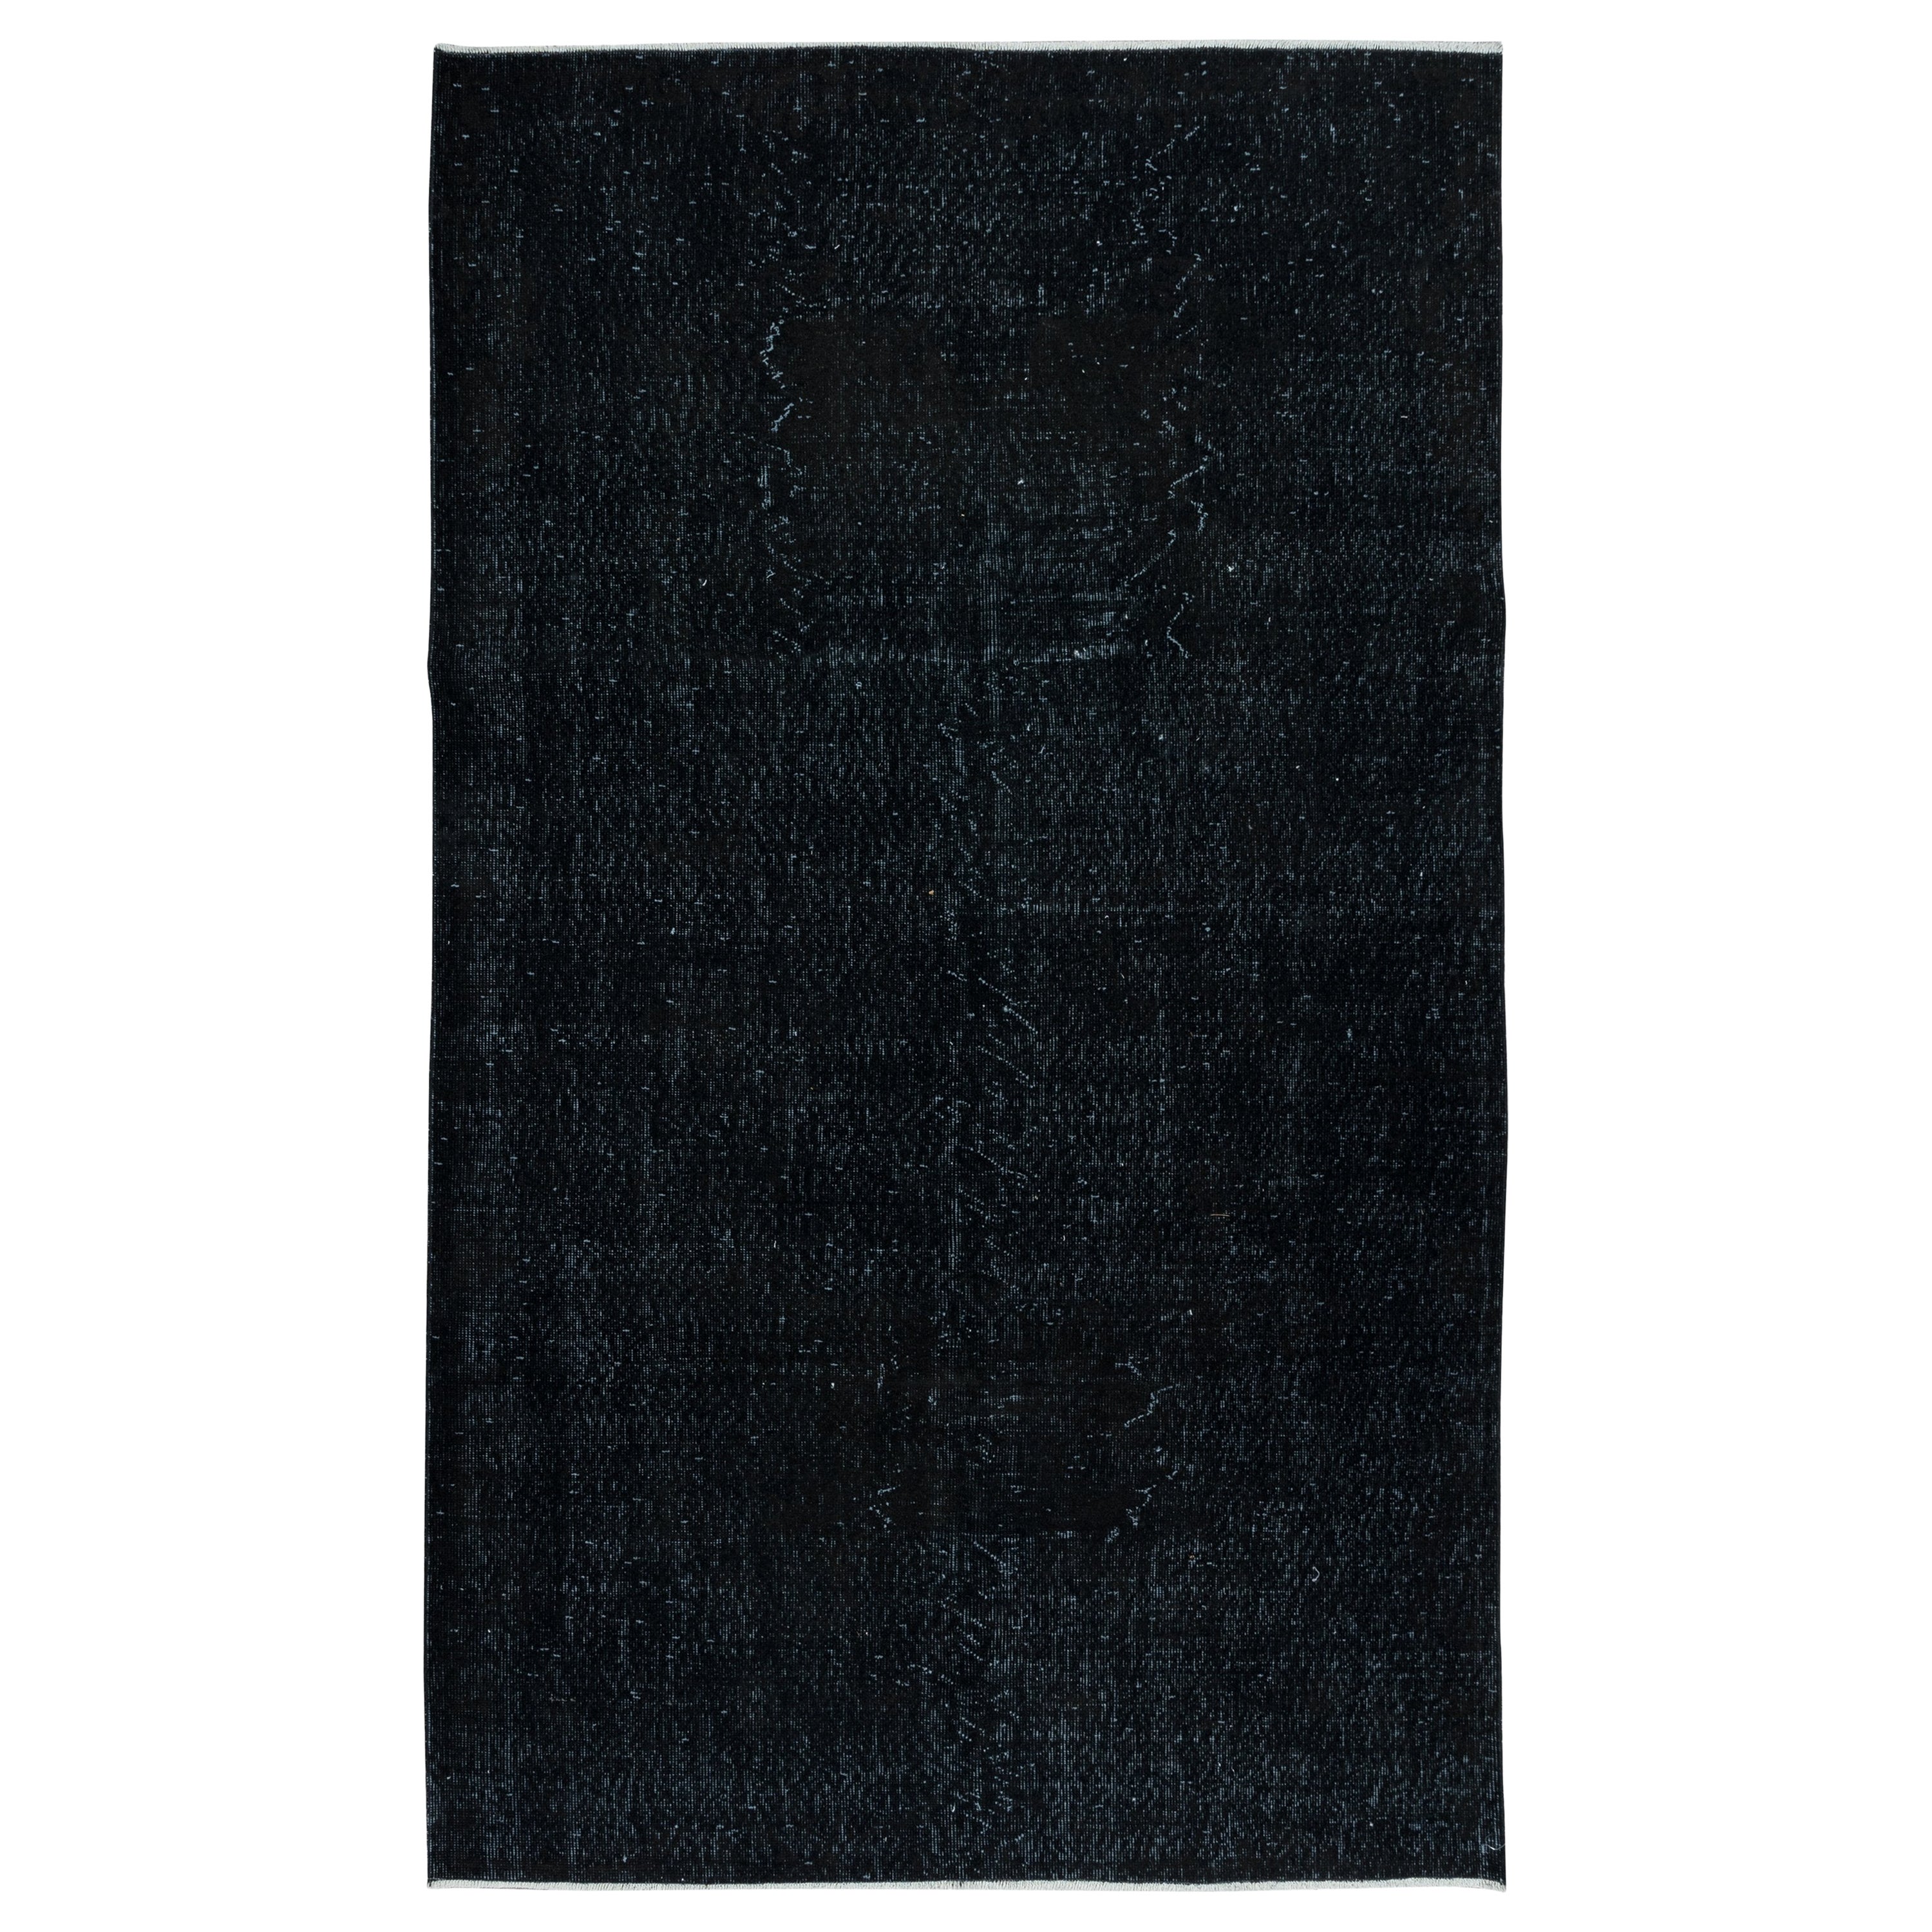 5.4x9 Ft Plain Black Area Rug, Handknotted and Handwoven in Turkey For Sale